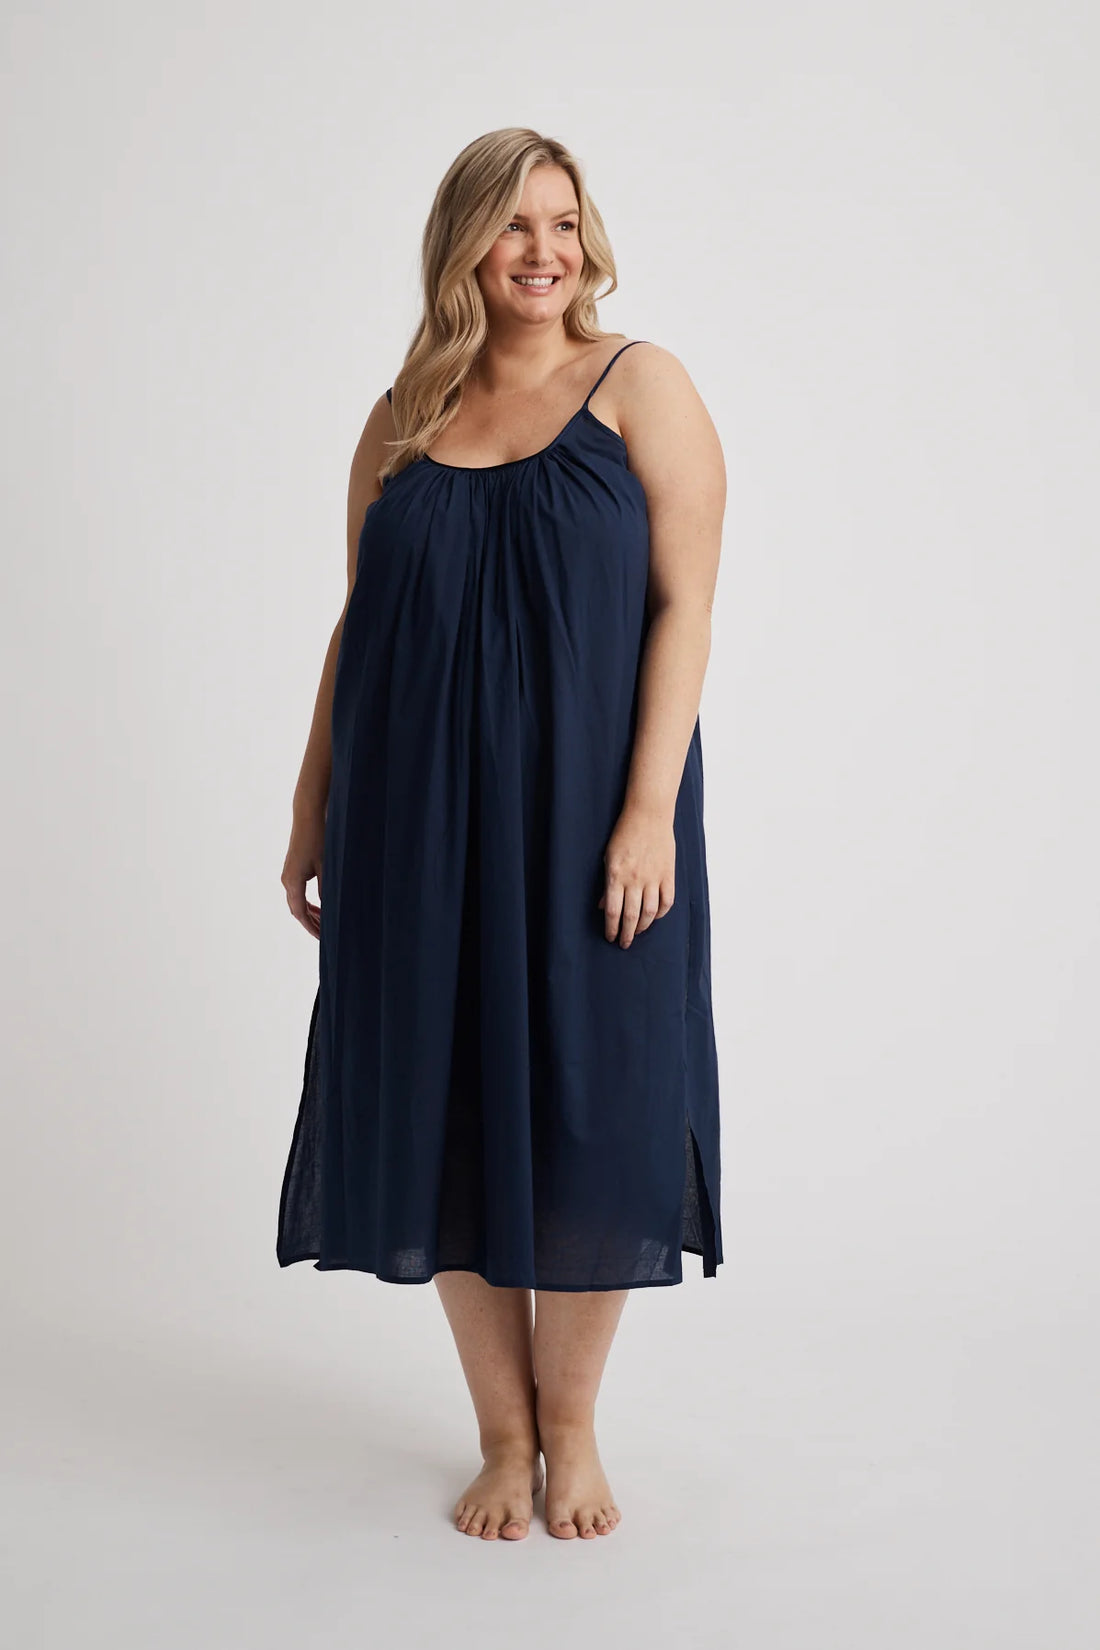 Postpartum Care and Sleepwear: Essential Considerations for Nighties